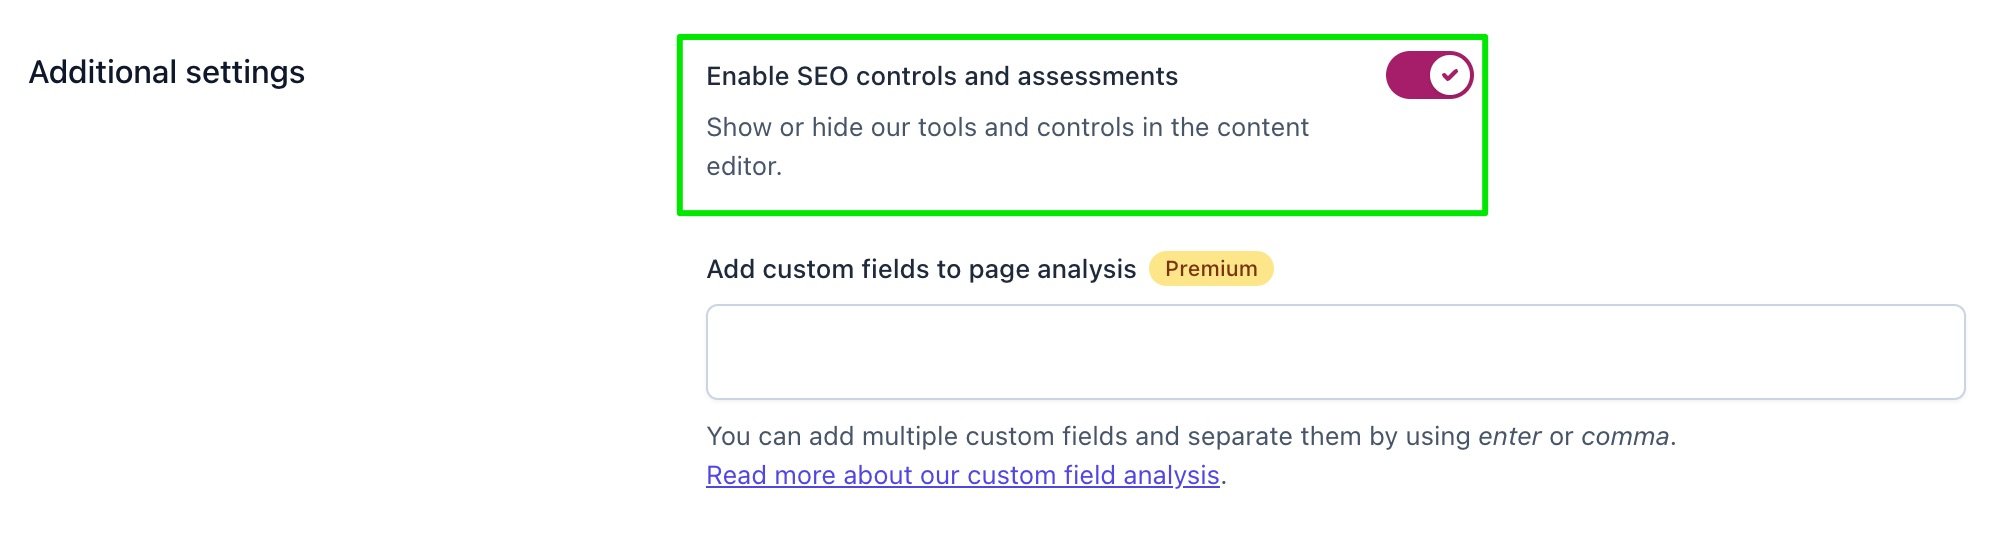 Screenshot of the 'Additional settings', highlighting the 'Enable SEO controls and assessments' toggle.